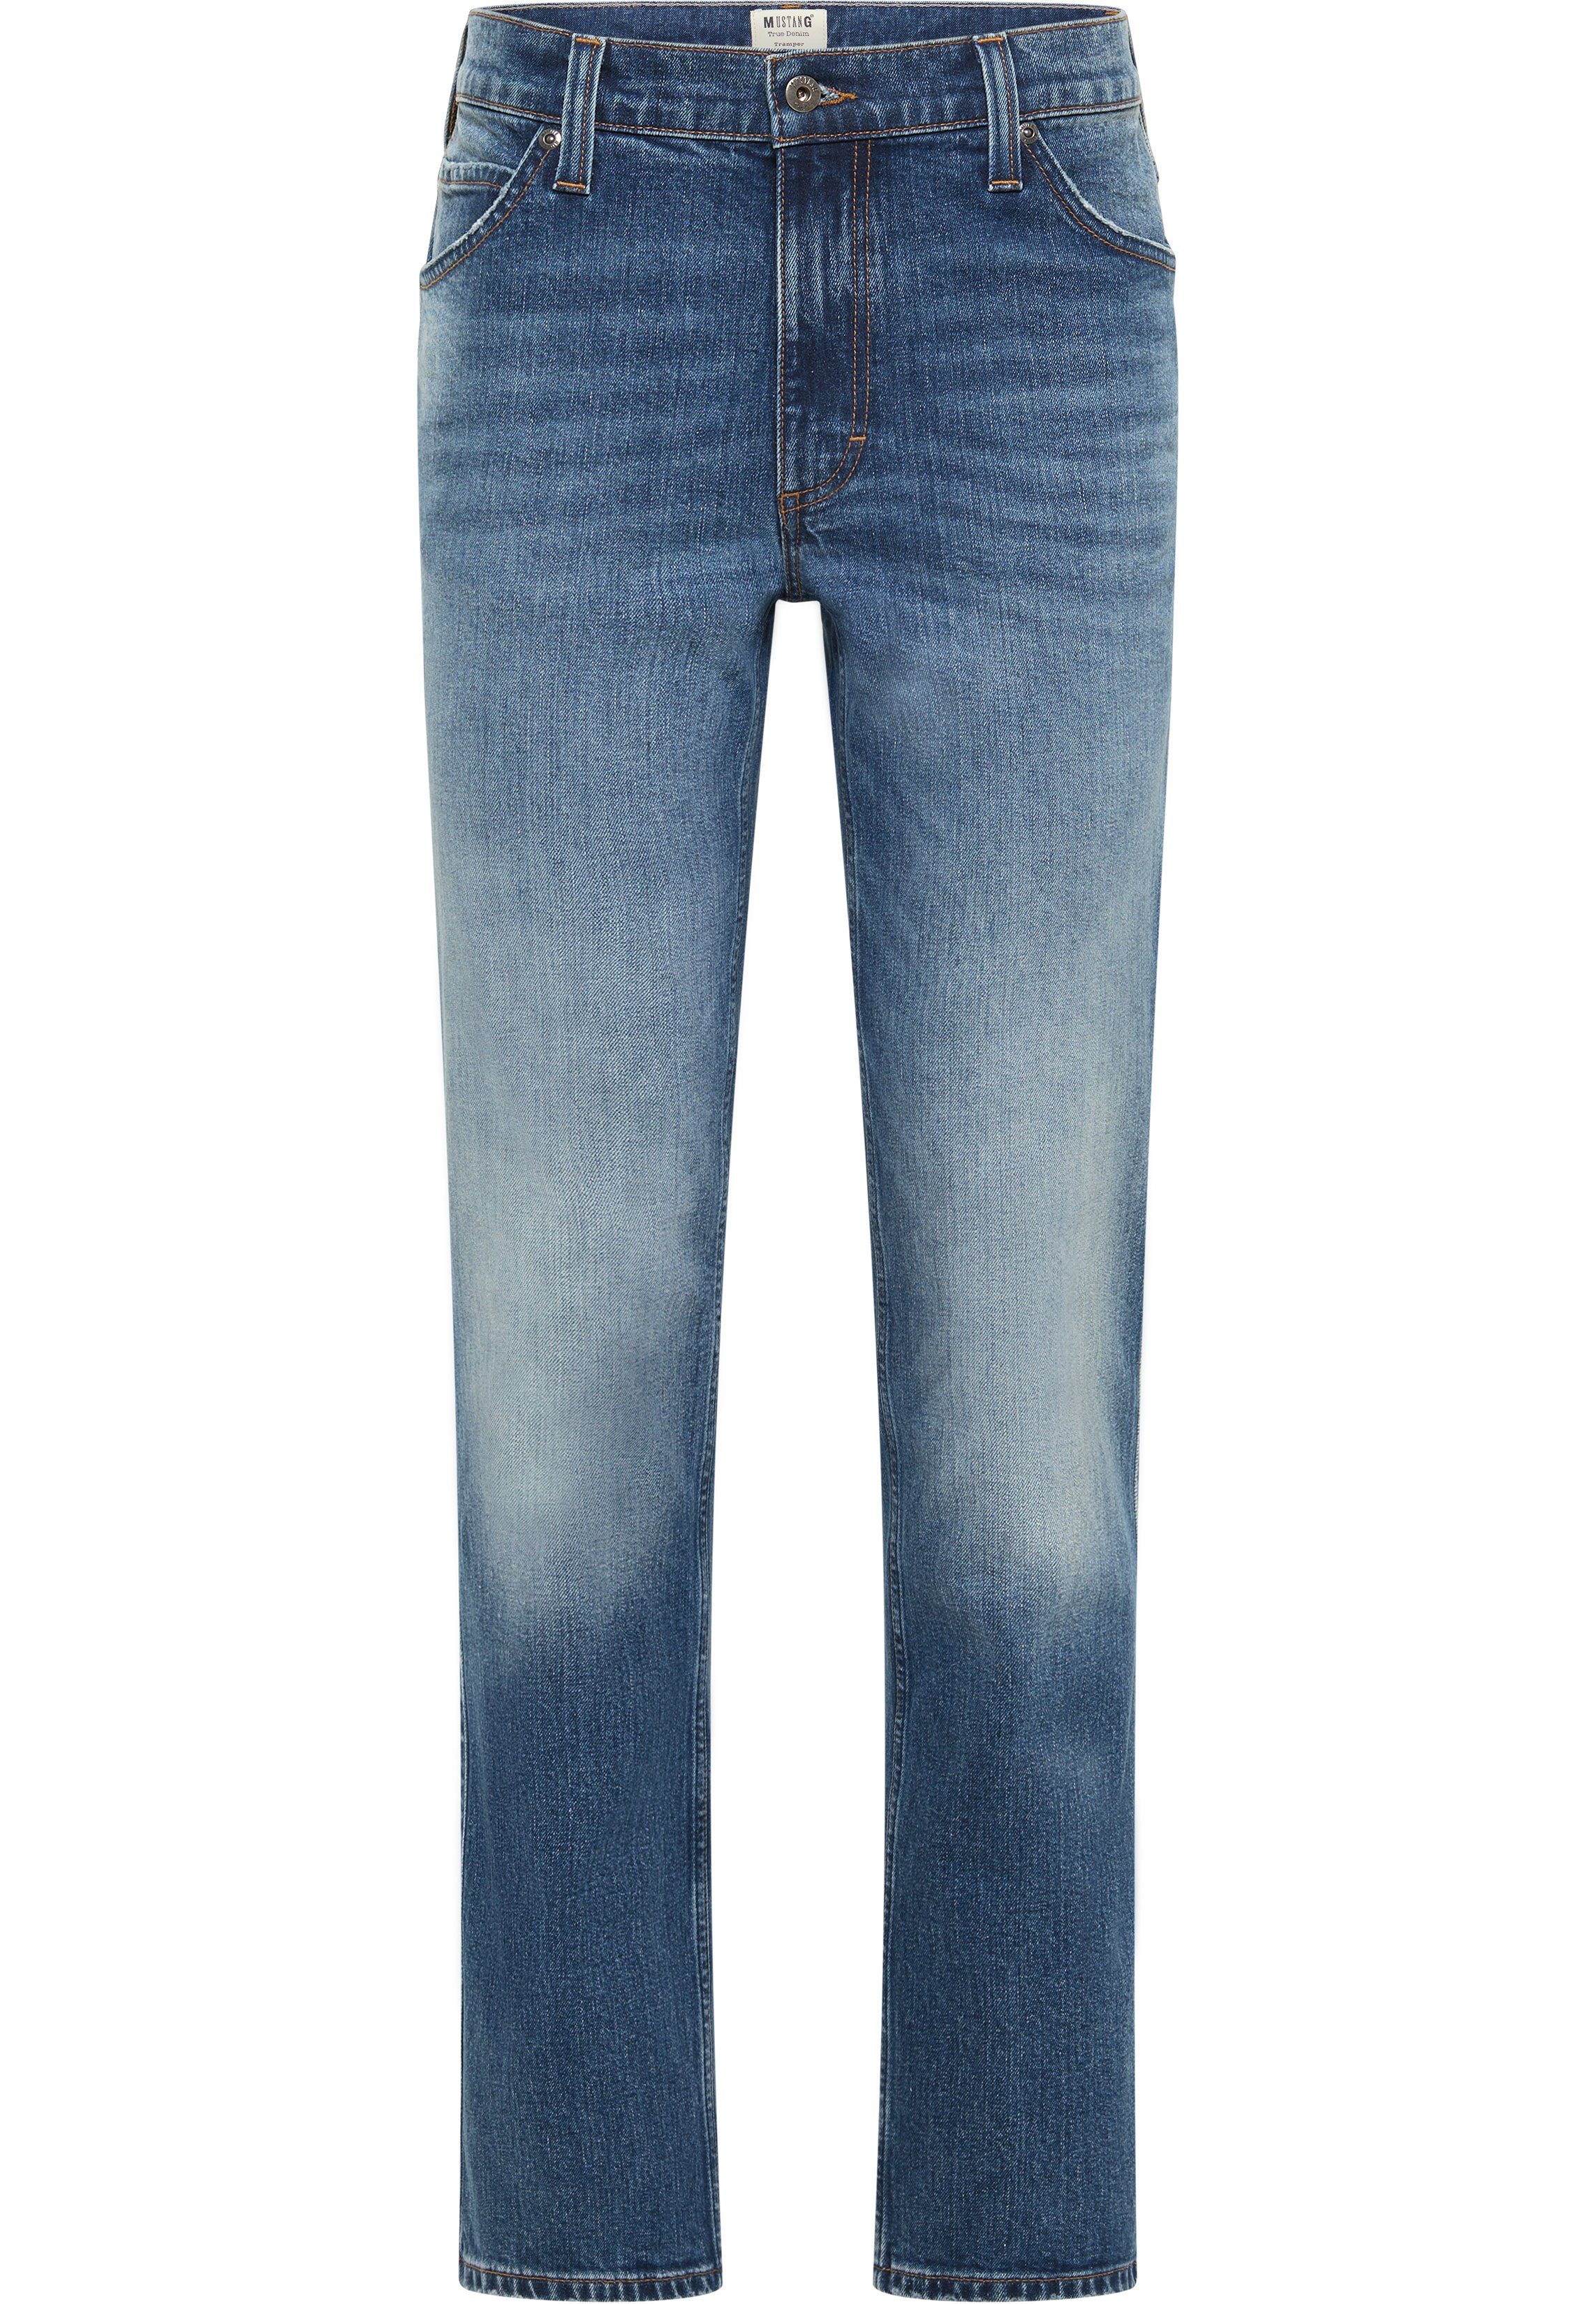 Style Tramper Bequeme Jeans MUSTANG